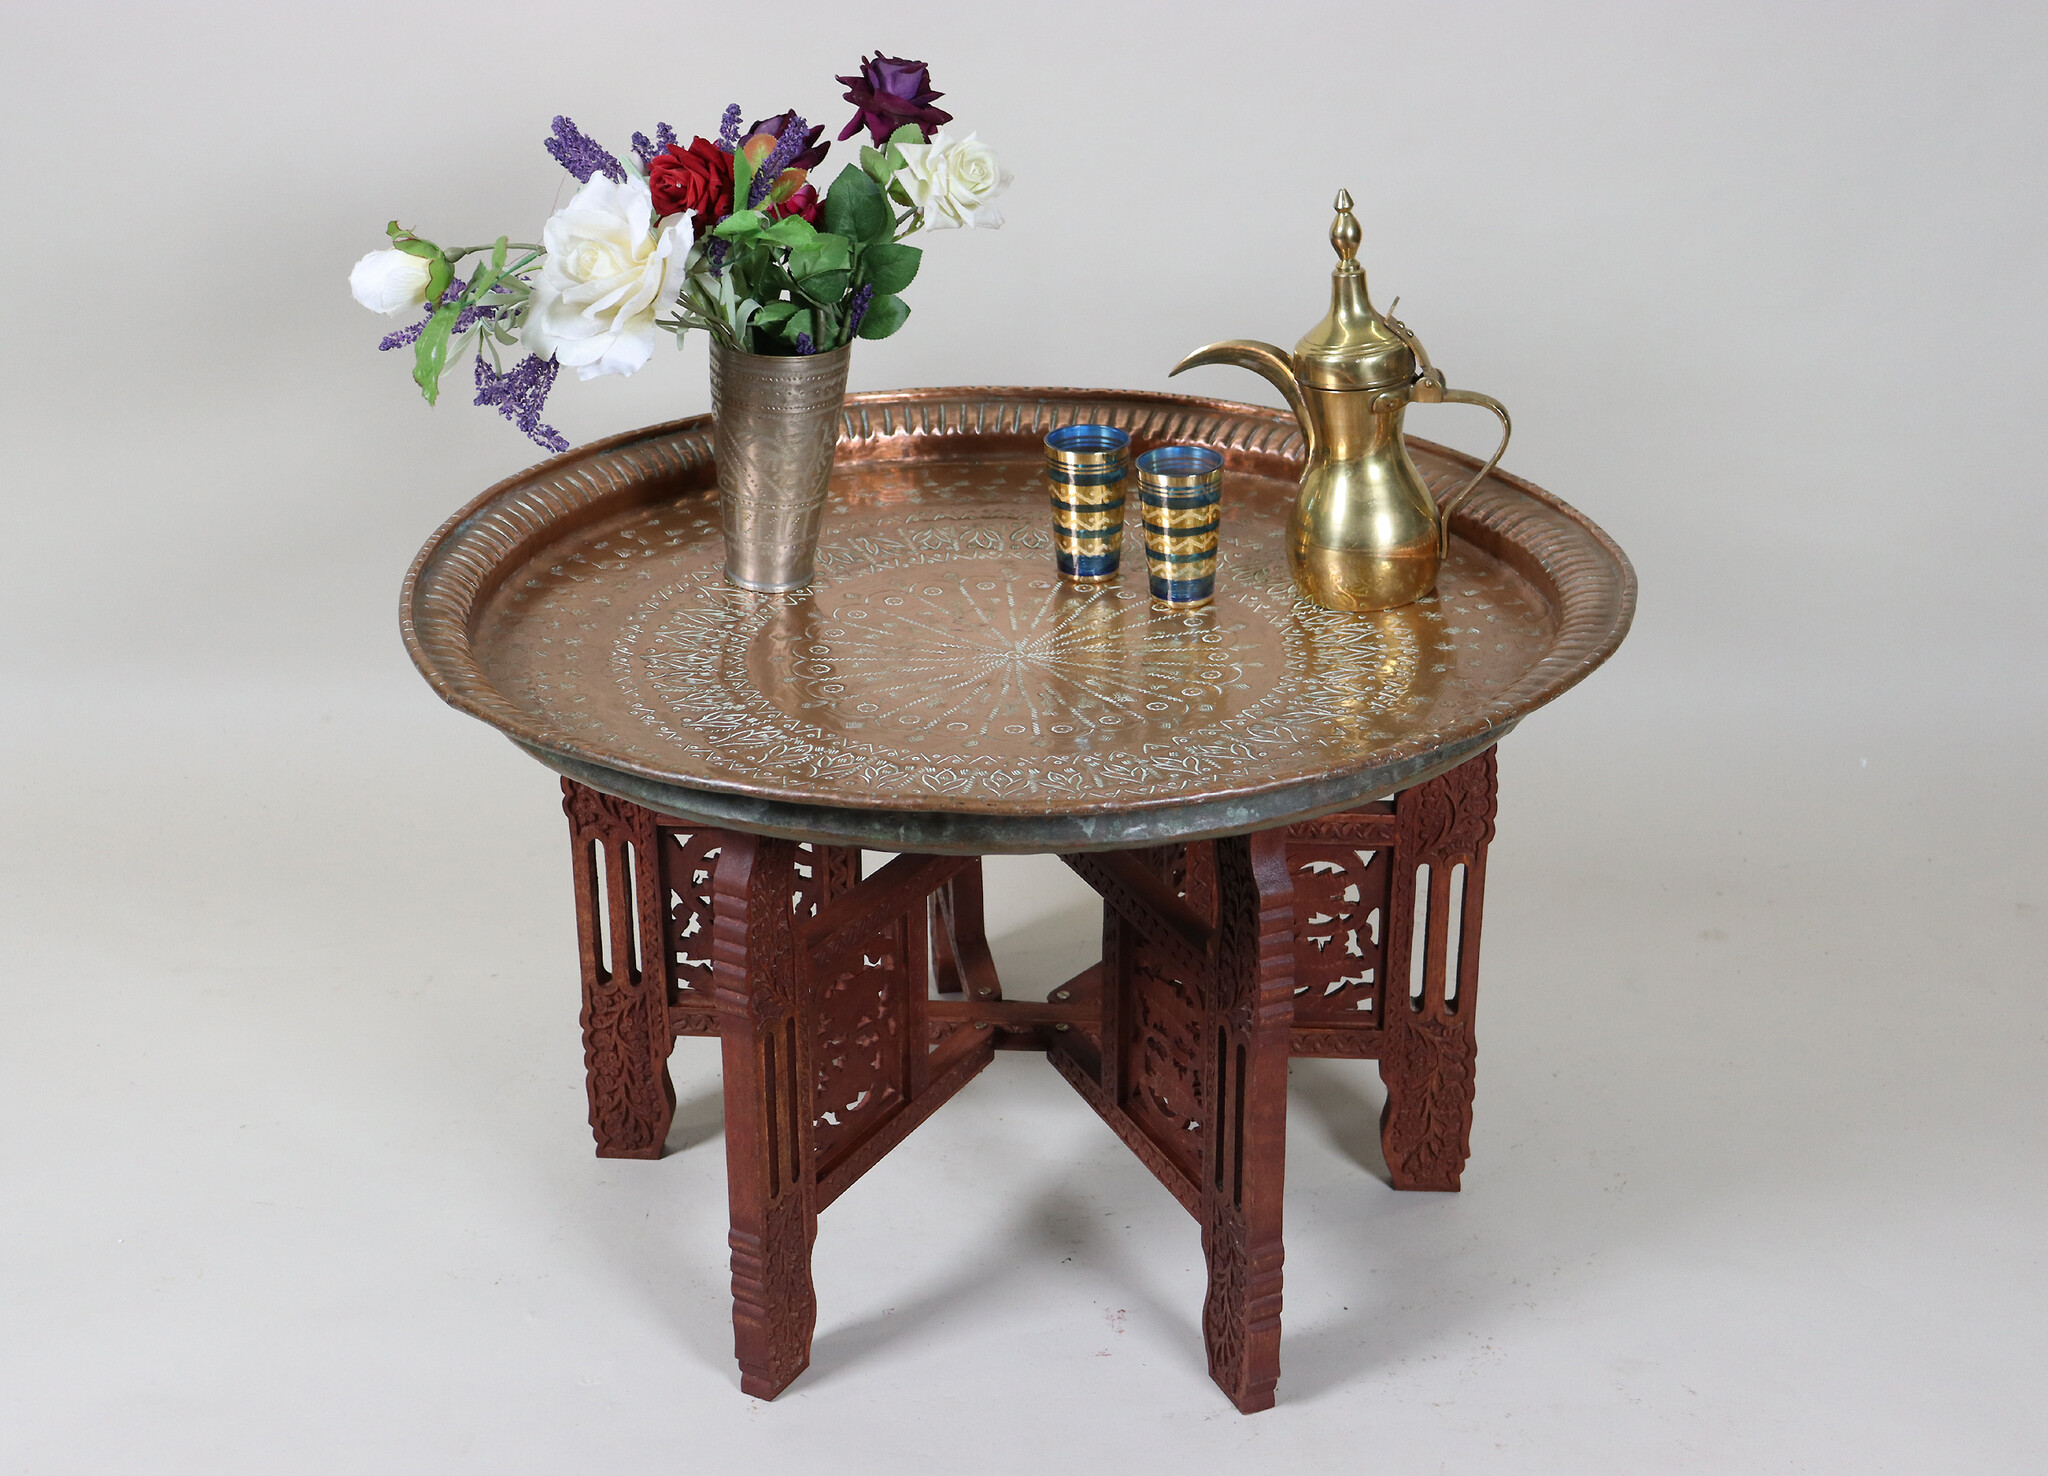 75  cm Ø  Antique ottoman orient Islamic  Hammer Engraved Copper table Tea table side table Tray from Afghanistan  No-HH - HH22B